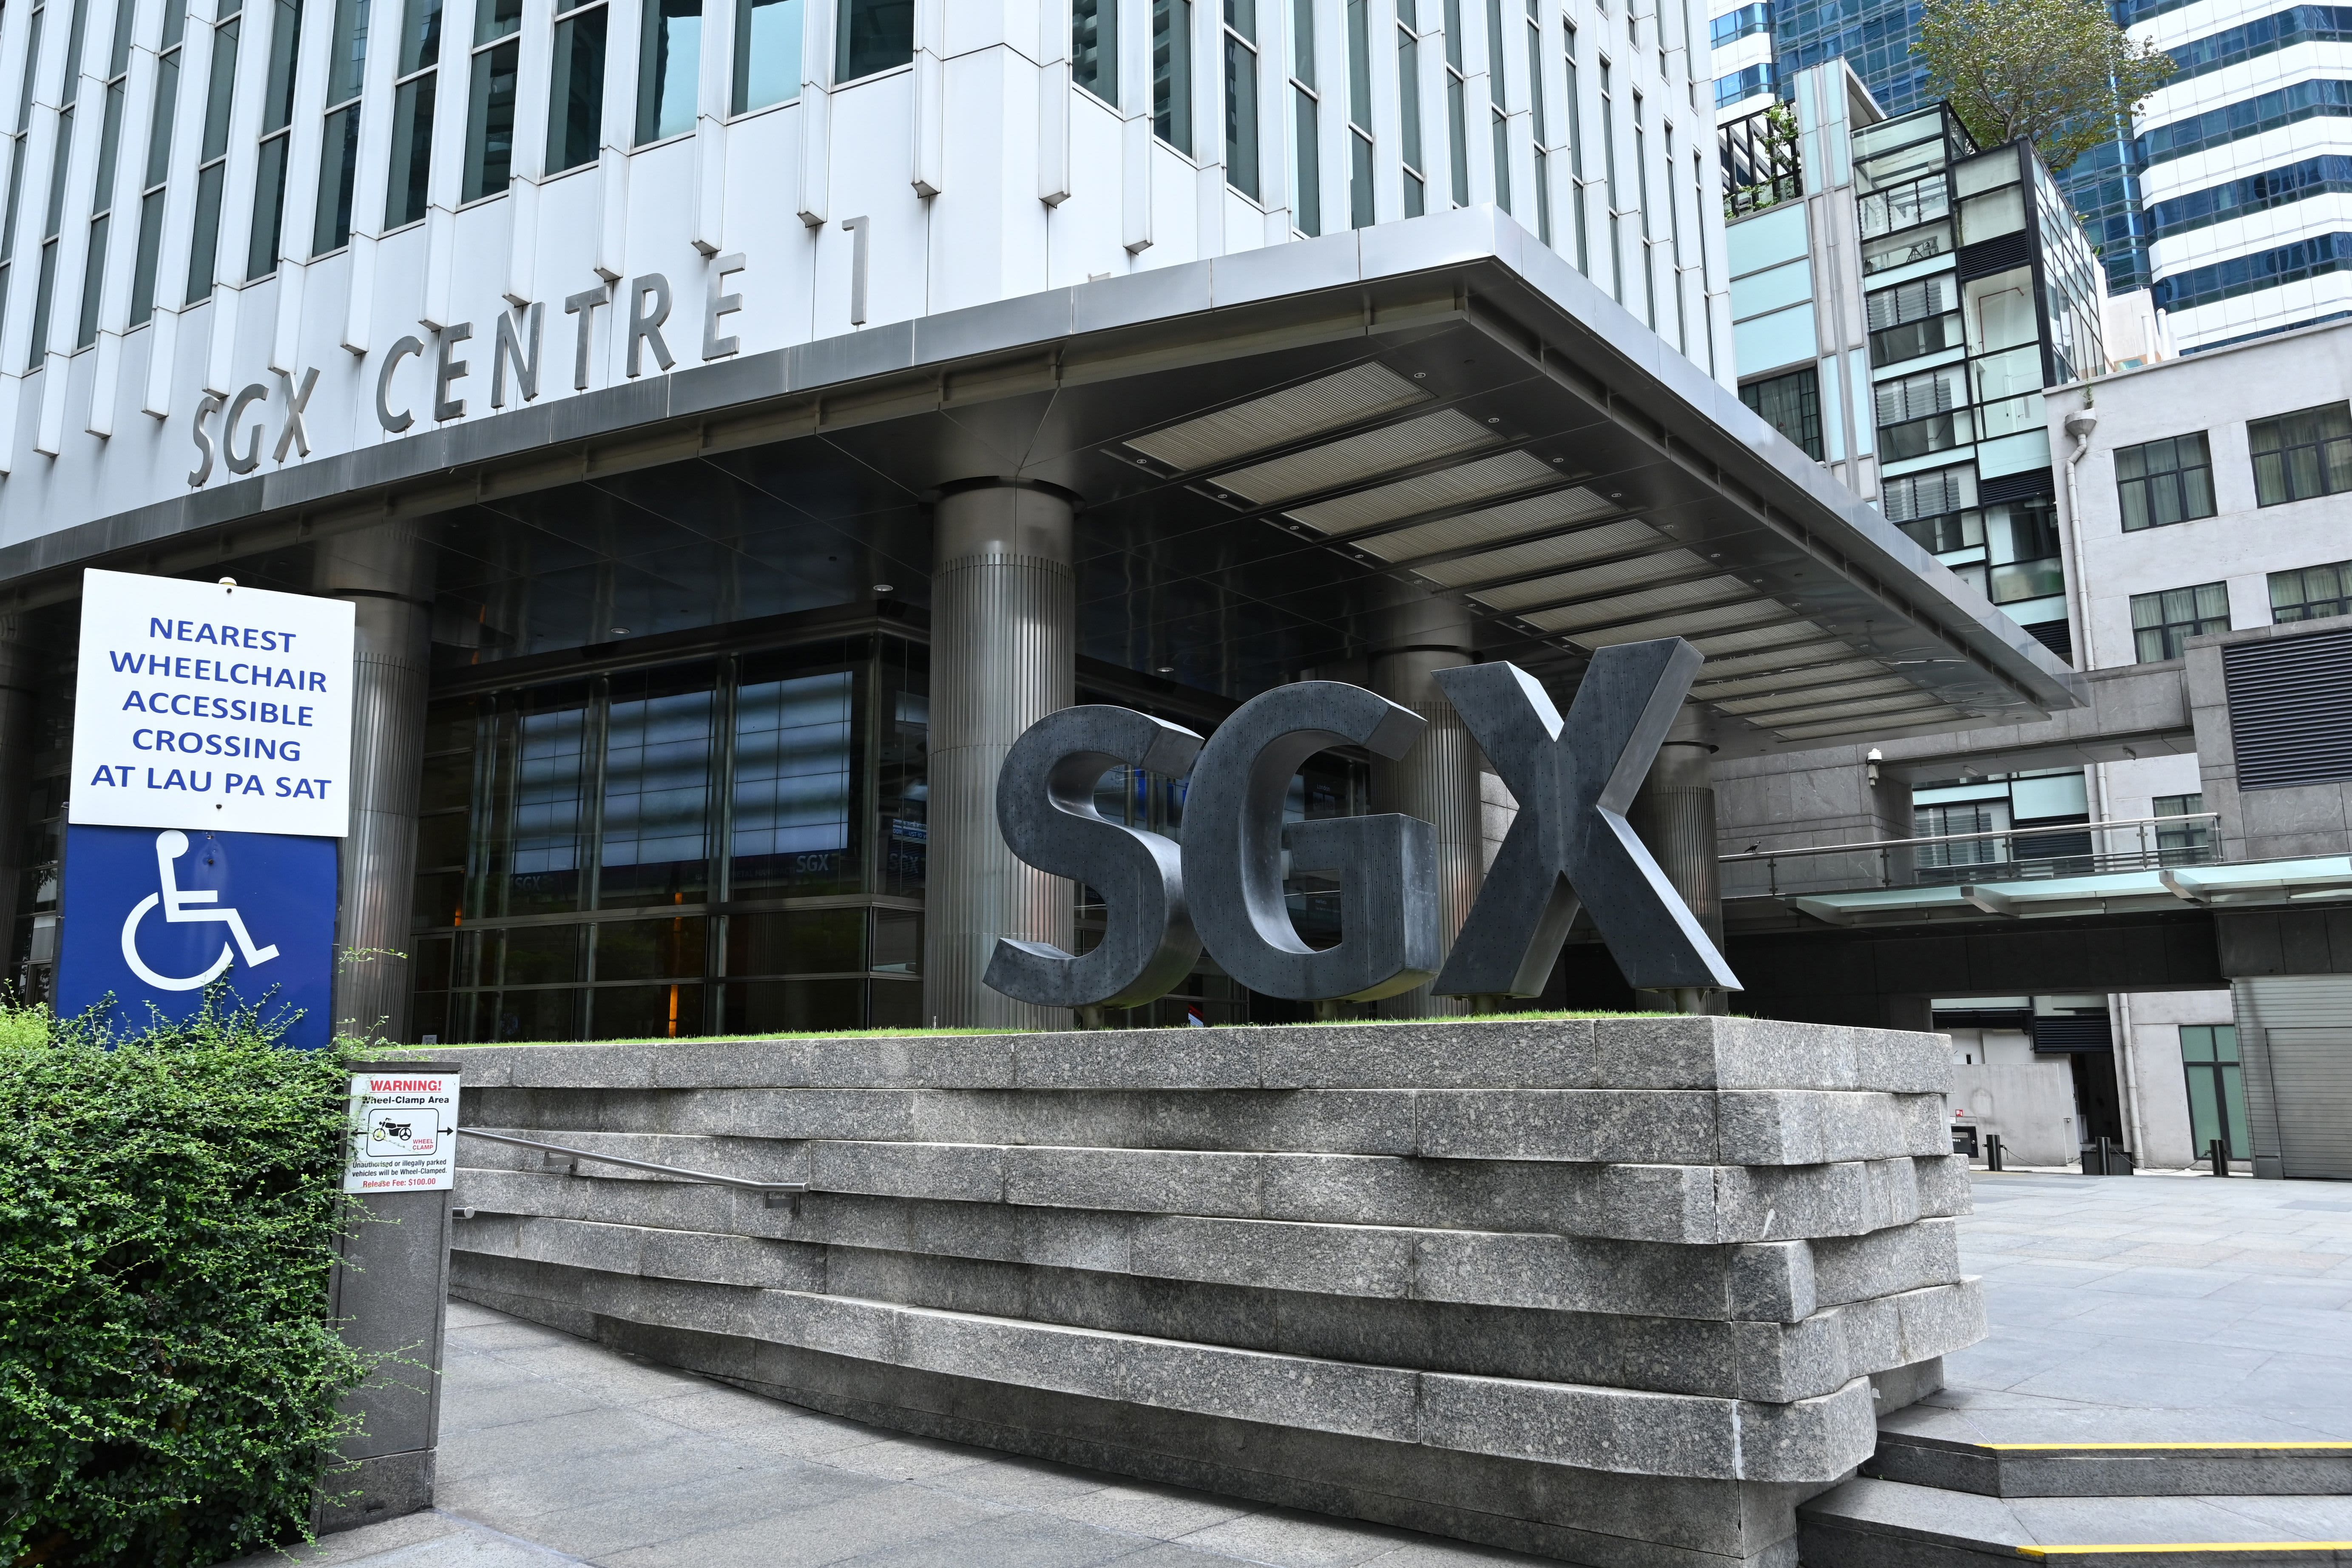 HSBC sees Singapore as a standout among Southeast Asia's markets as region grapples with Covid